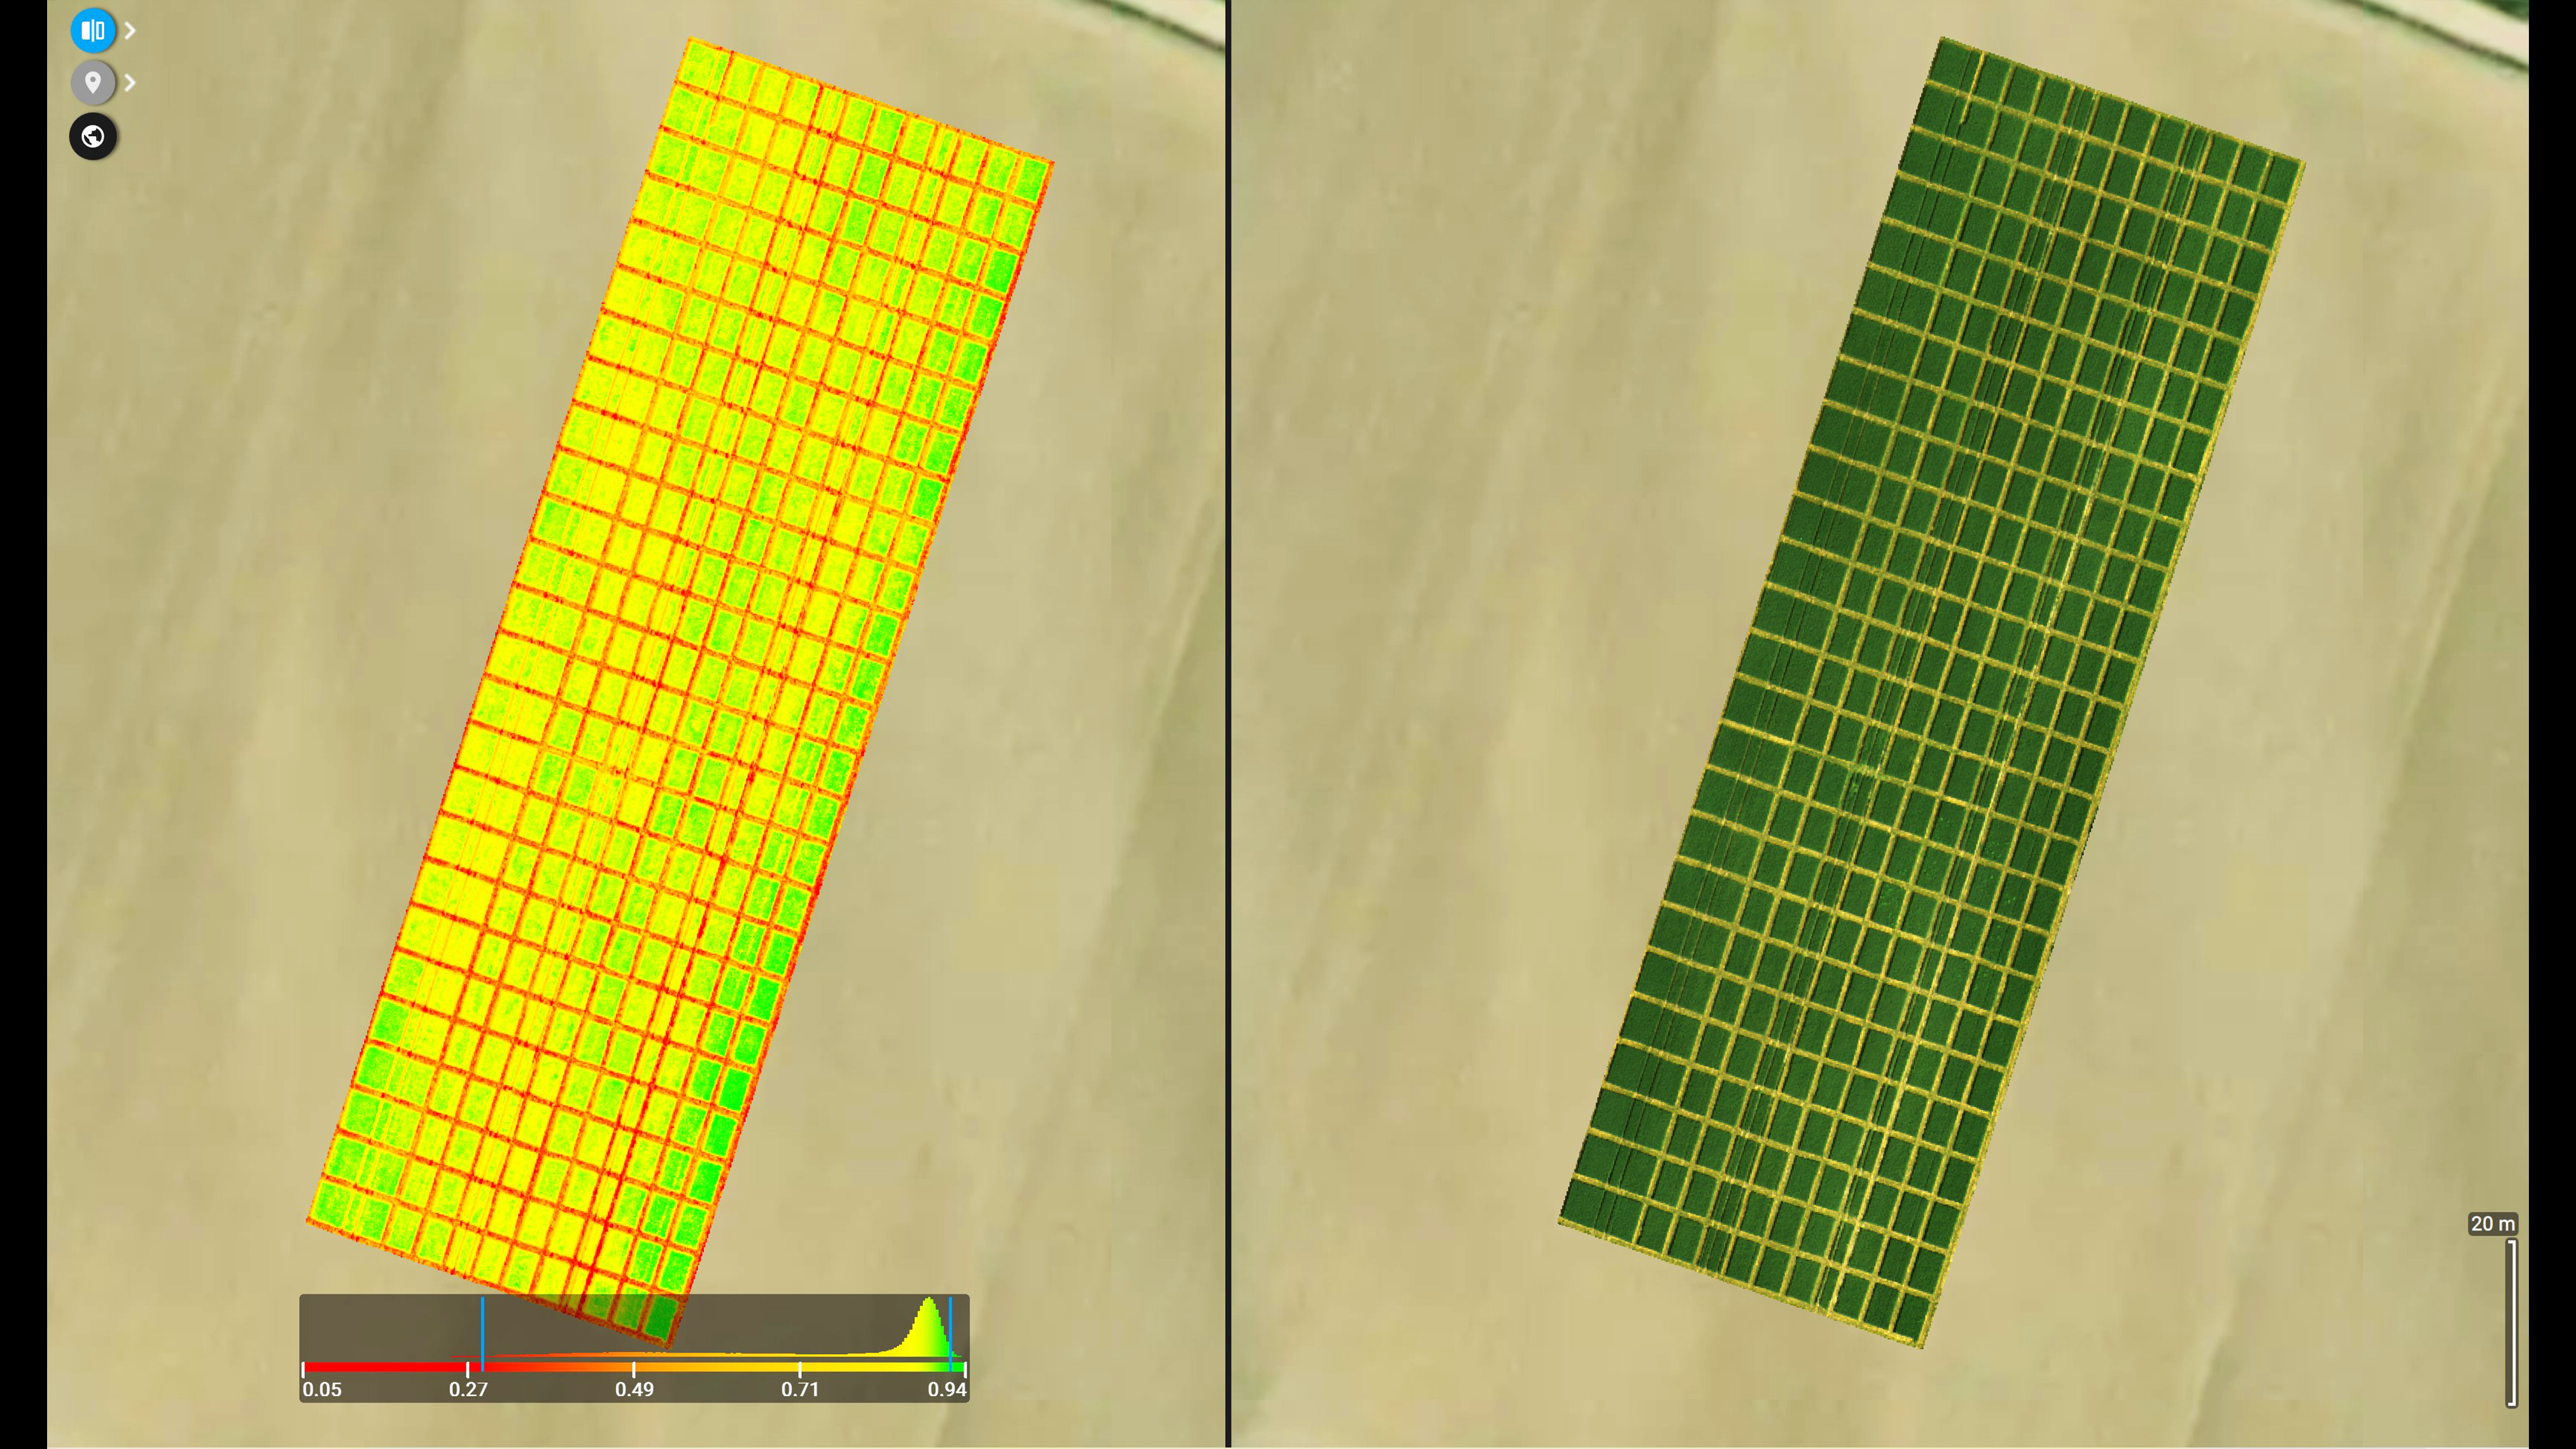 NDVI Index for the May dataset